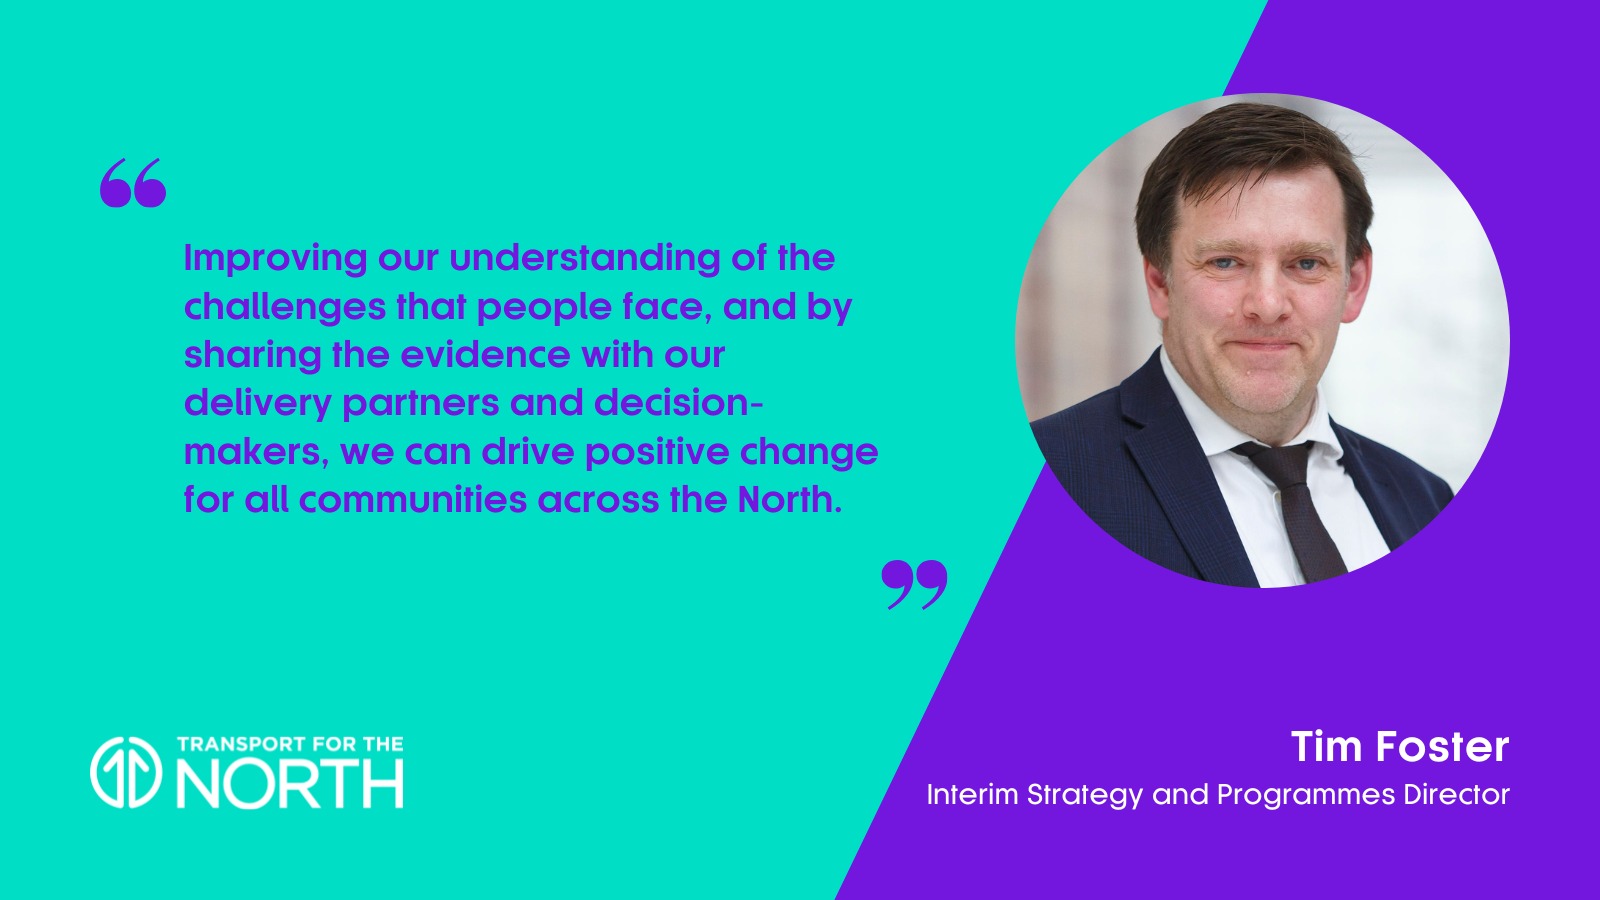 Tim Foster on driving positive change for communities in the North